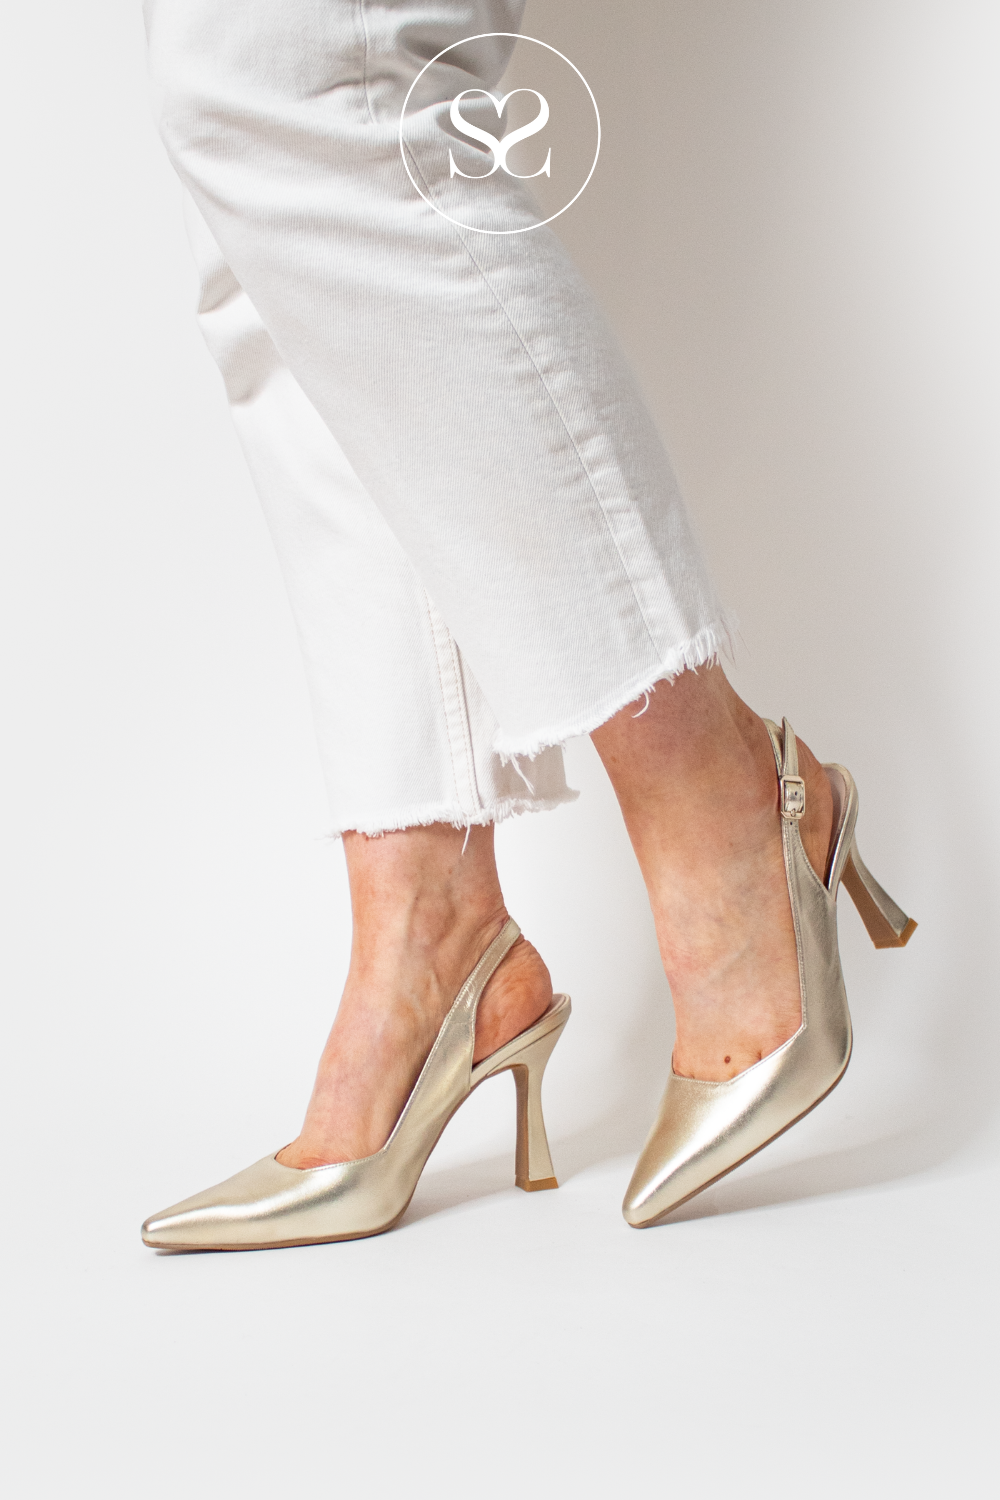 LODI MODERN GOLD LEATHER POINTED TOE HIGH HEEL WITH SCULPTED HEEL AND ADJUSTABLE SLINGBACK STRAP